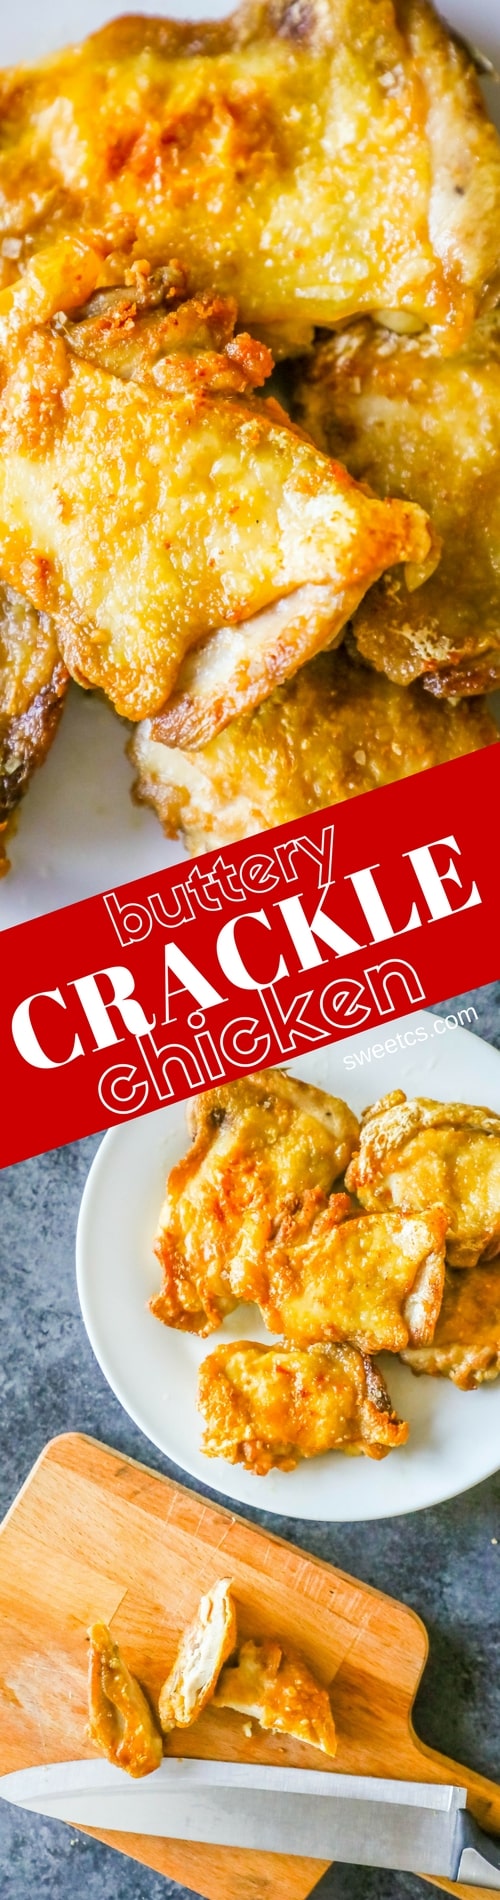 chicken thighs on a plate with "buttery crackle chicken" written on picture